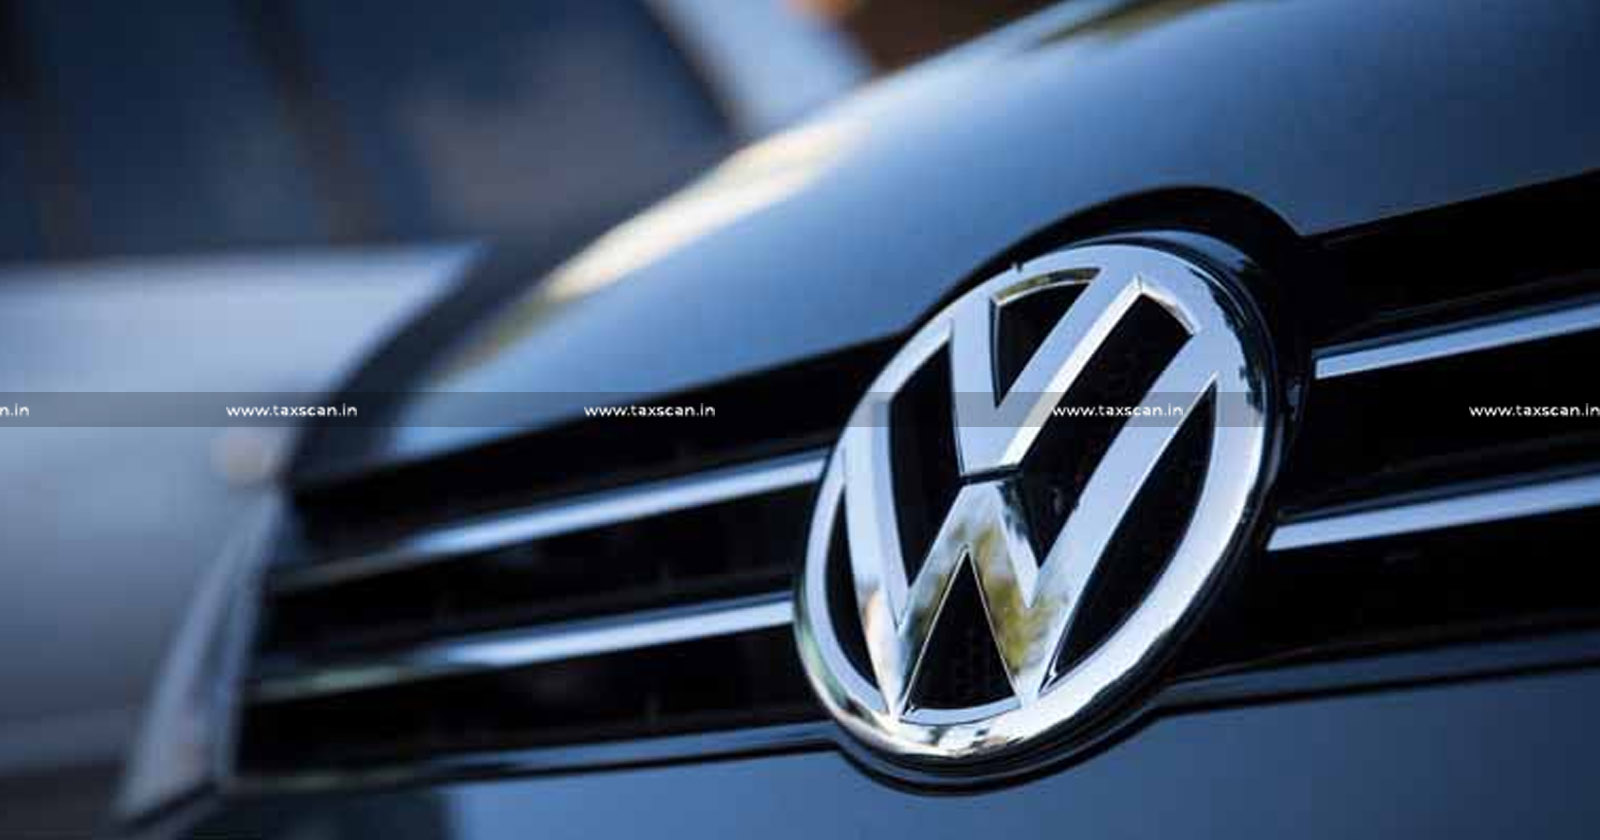 Relief to Volkswagen - CESTAT Quashes Excise Duty Demand - Amount Recovered as Liquidated Damages on ground of Non - violation - Central Excise Rules - TAXSCAN